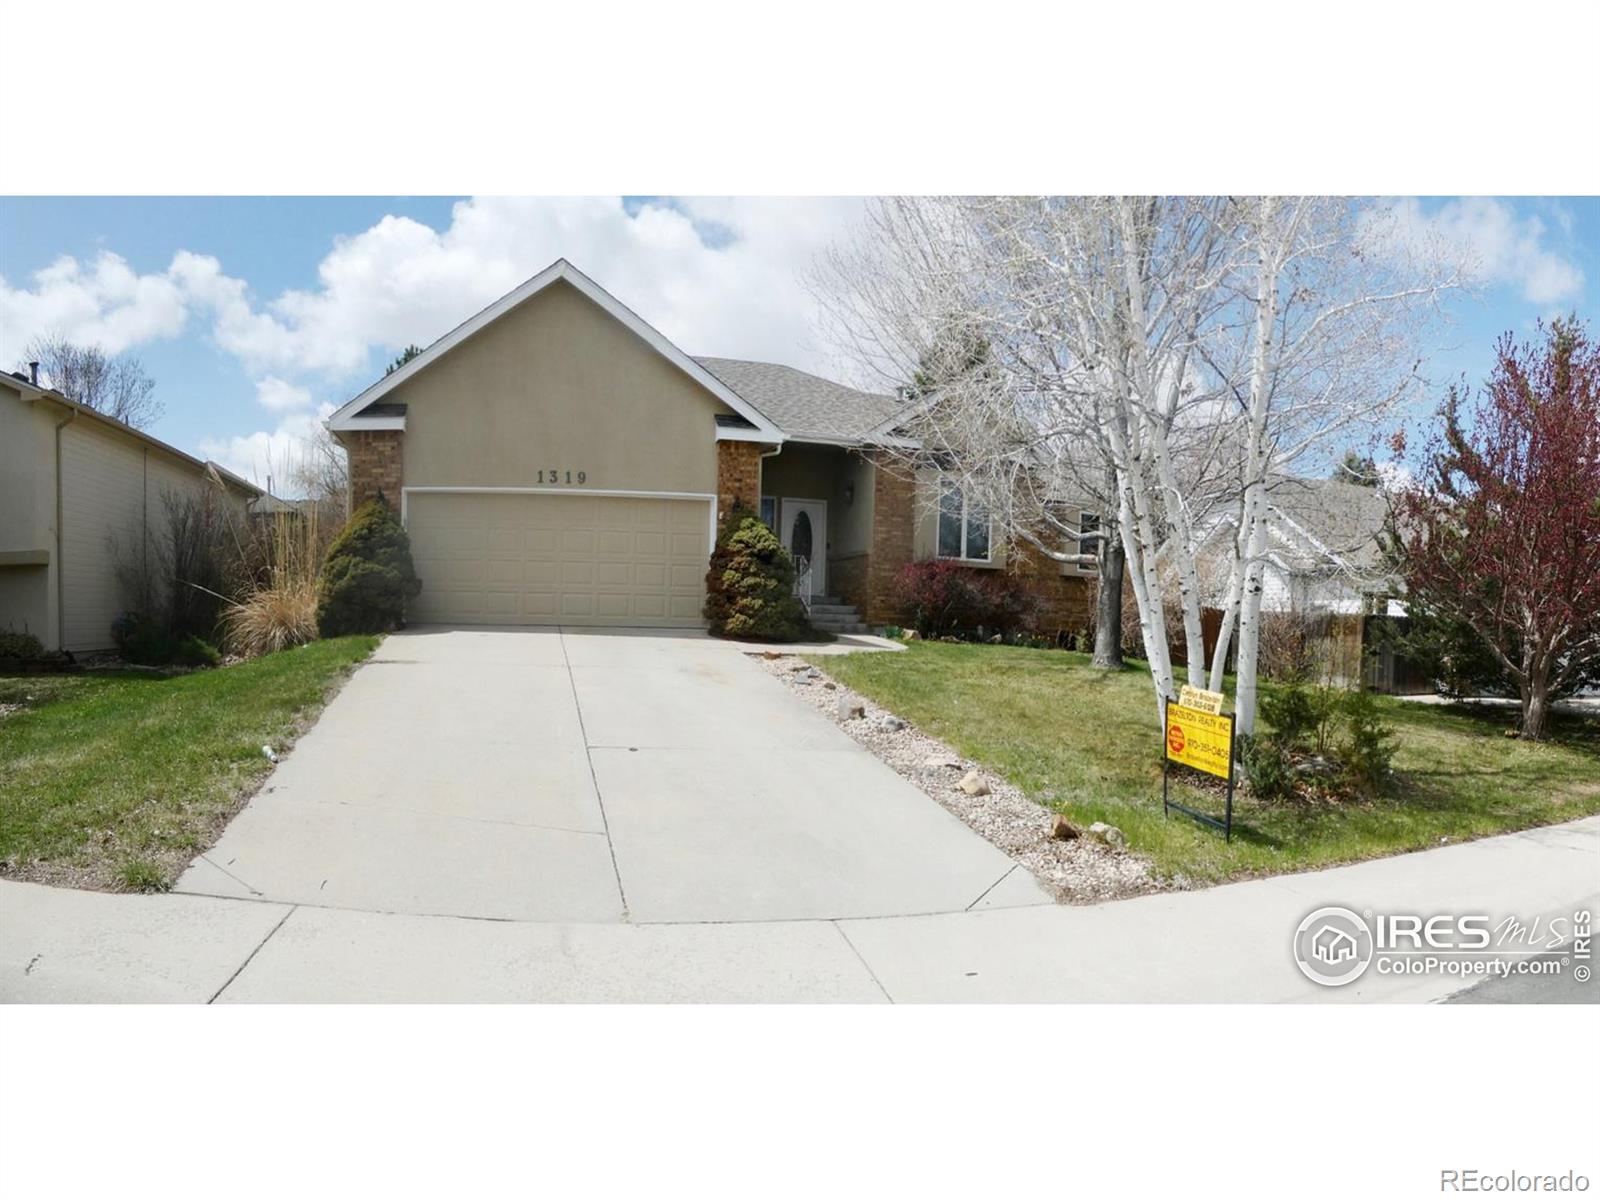 1319  51st Ave Ct, greeley MLS: 123456789984689 Beds: 4 Baths: 3 Price: $489,900